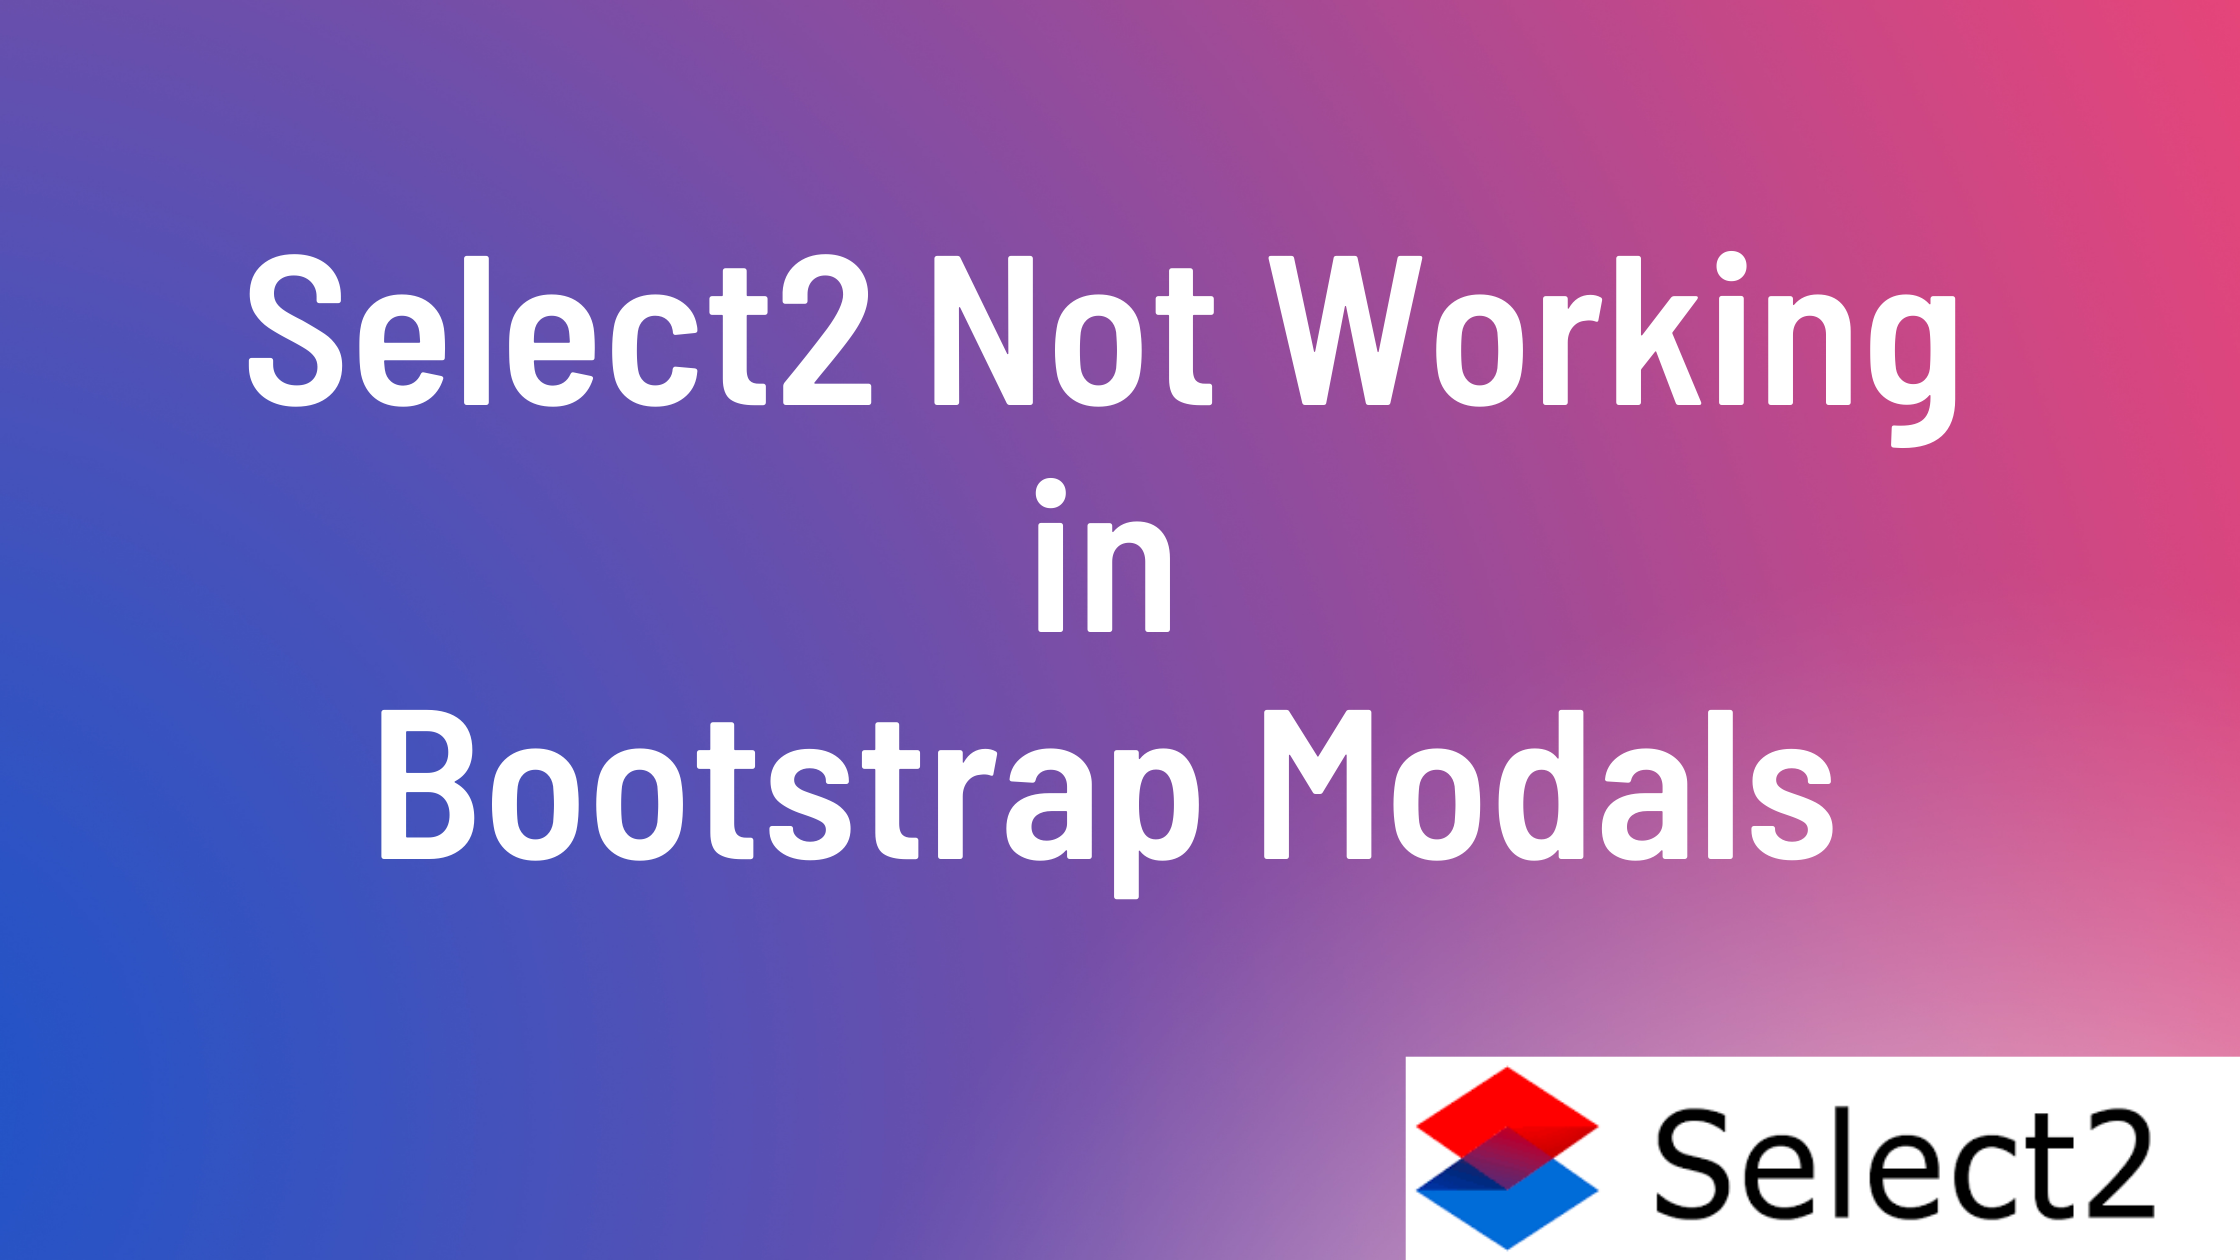 Select2 Not Working in Bootstrap Modals